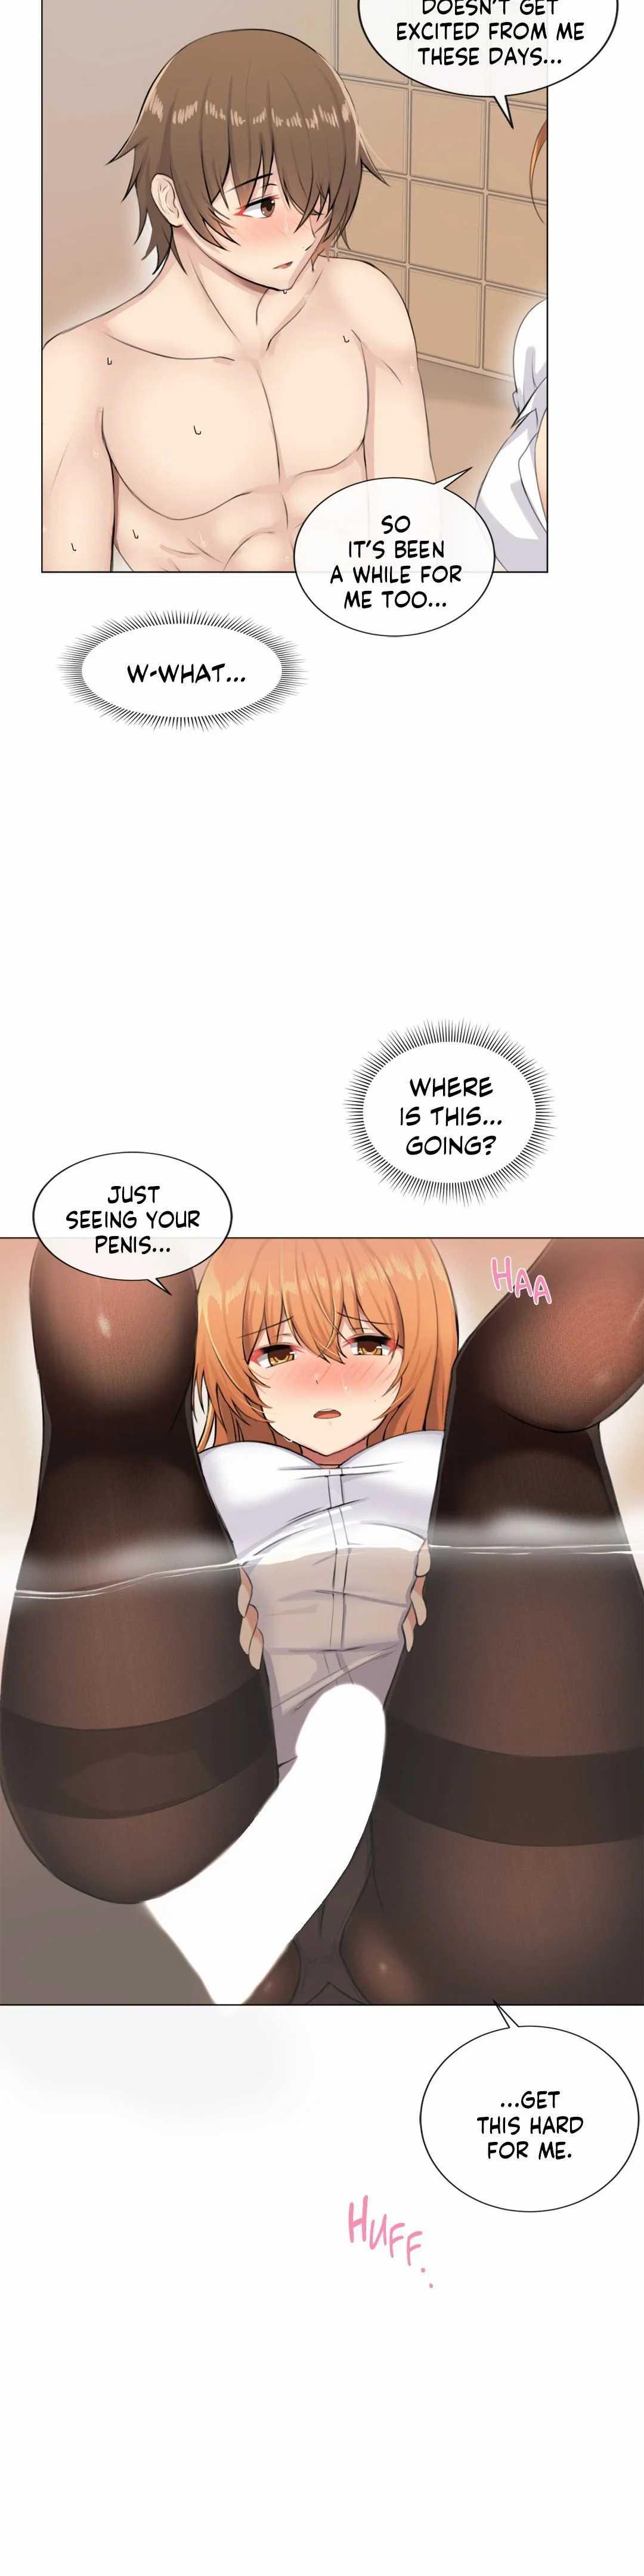 [Dumangoon, 130F] Sexcape Room: Pile Up Ch.9/9 [English] [Manhwa PDF] Completed 60